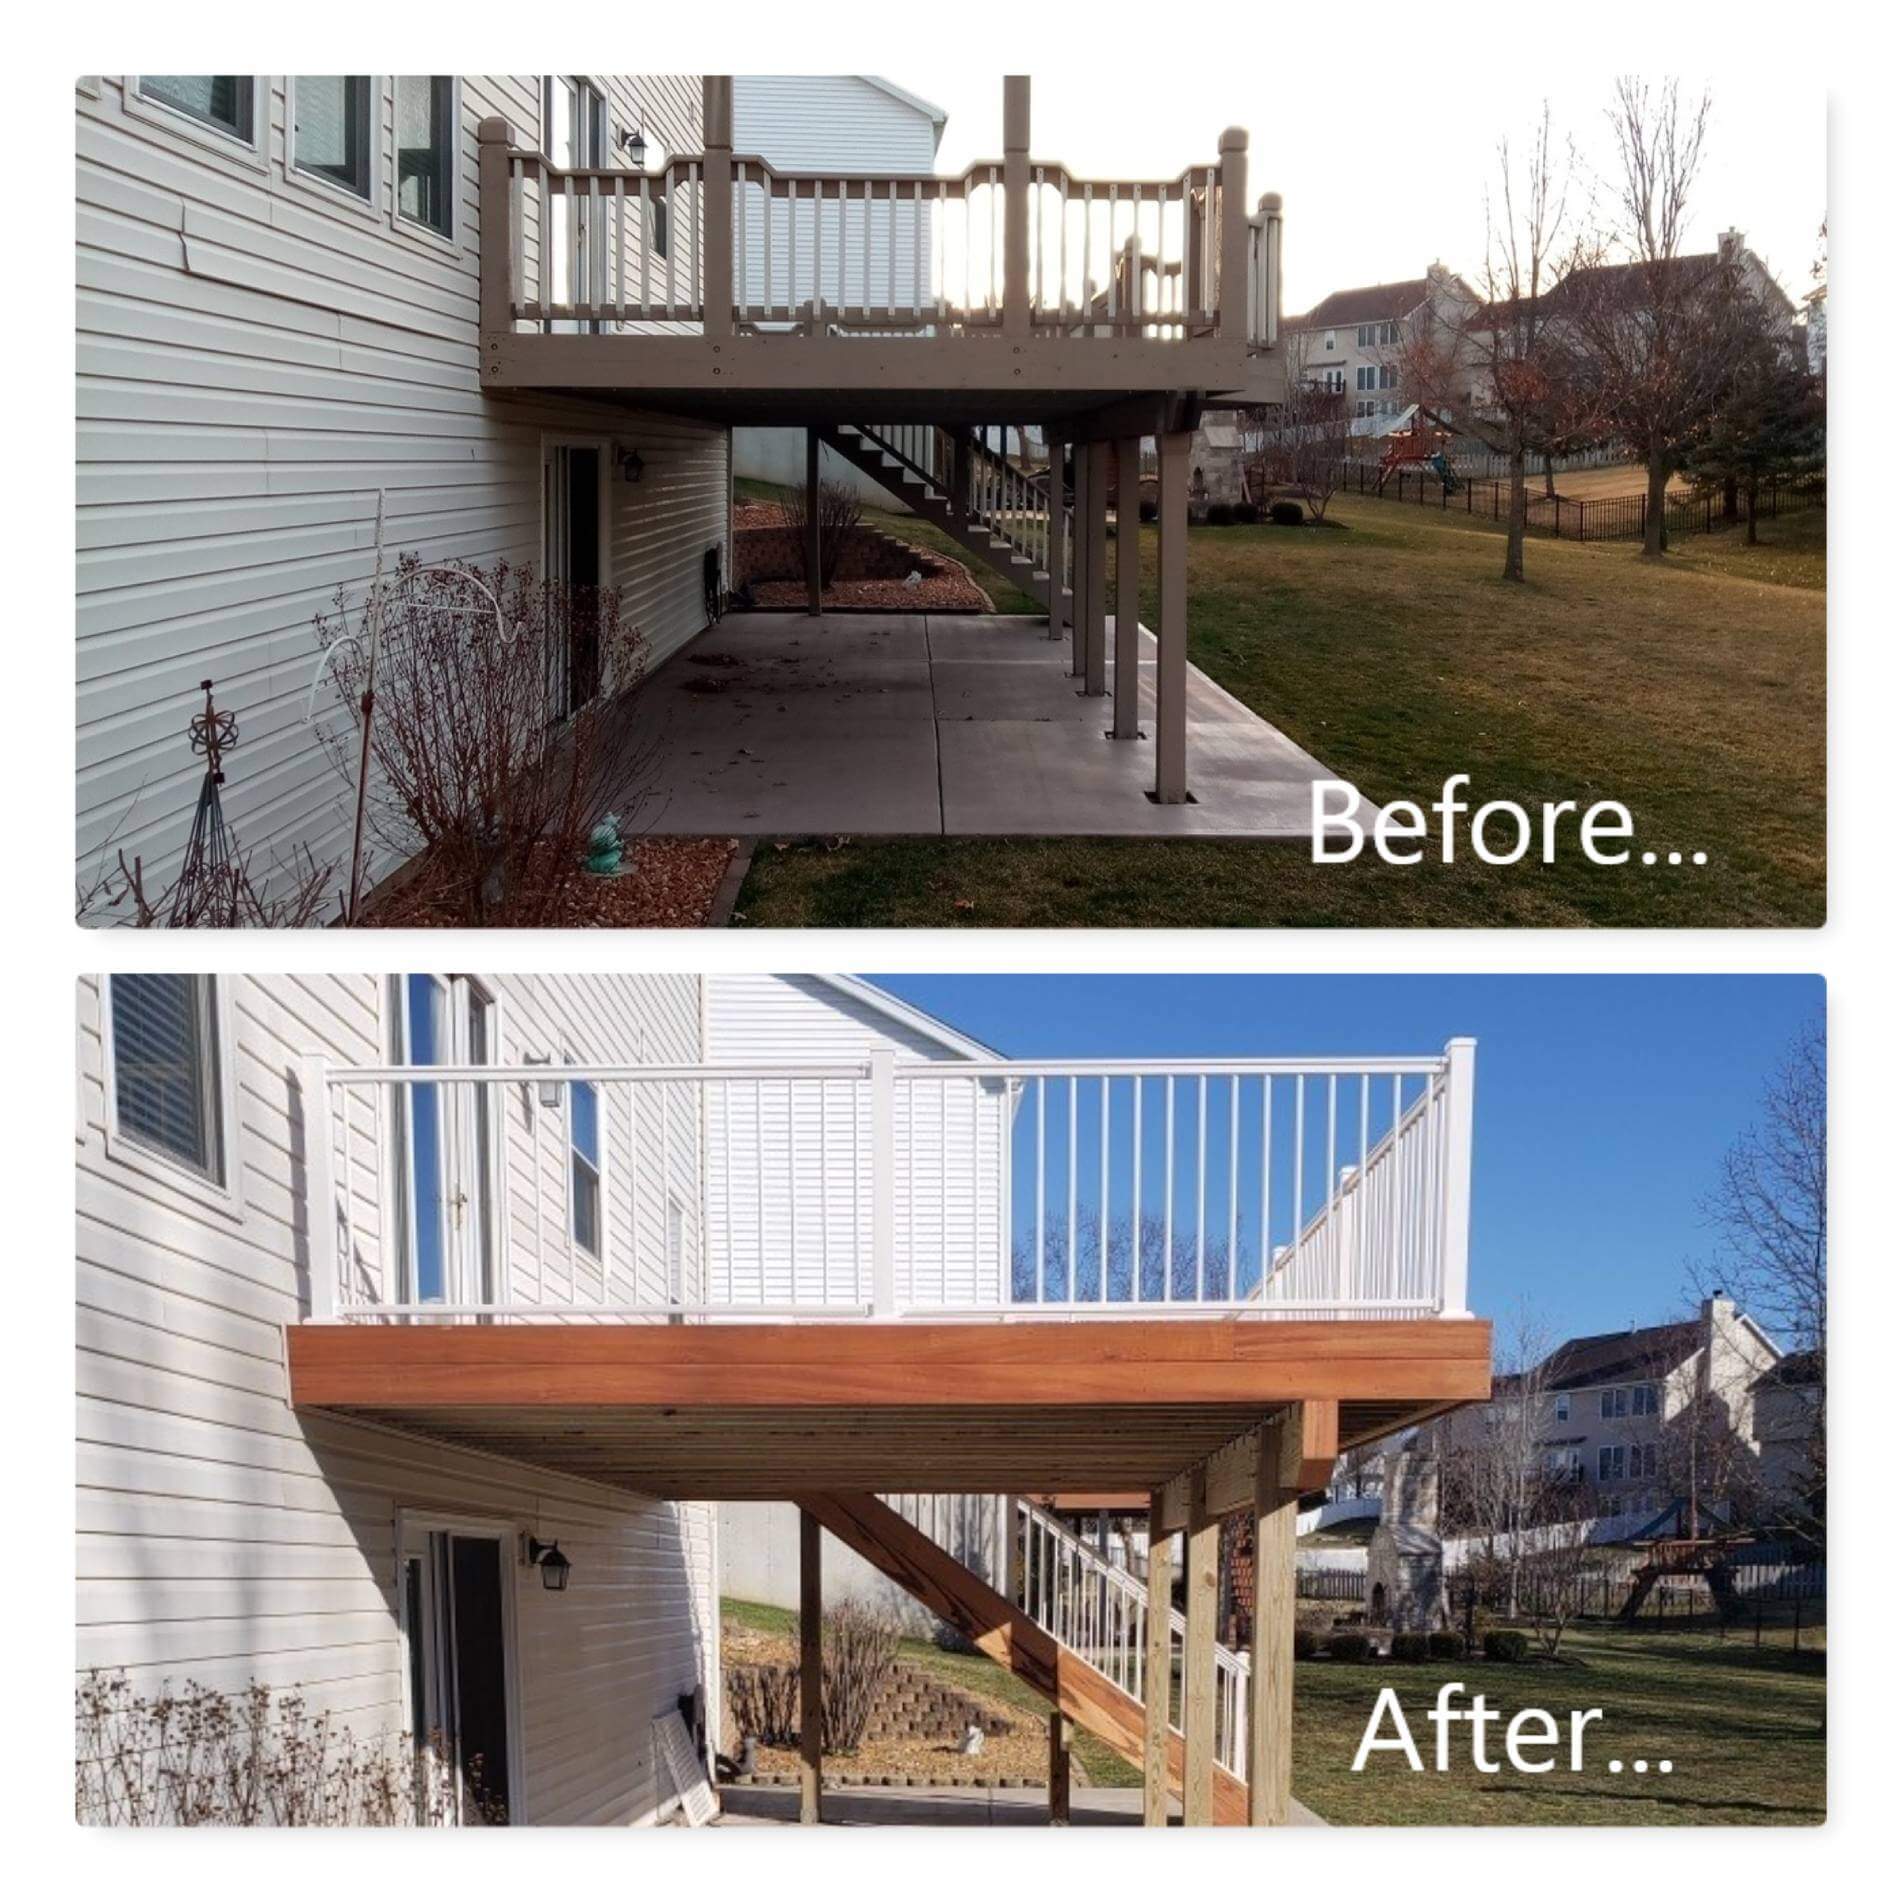 Before and After Deck Installation Project